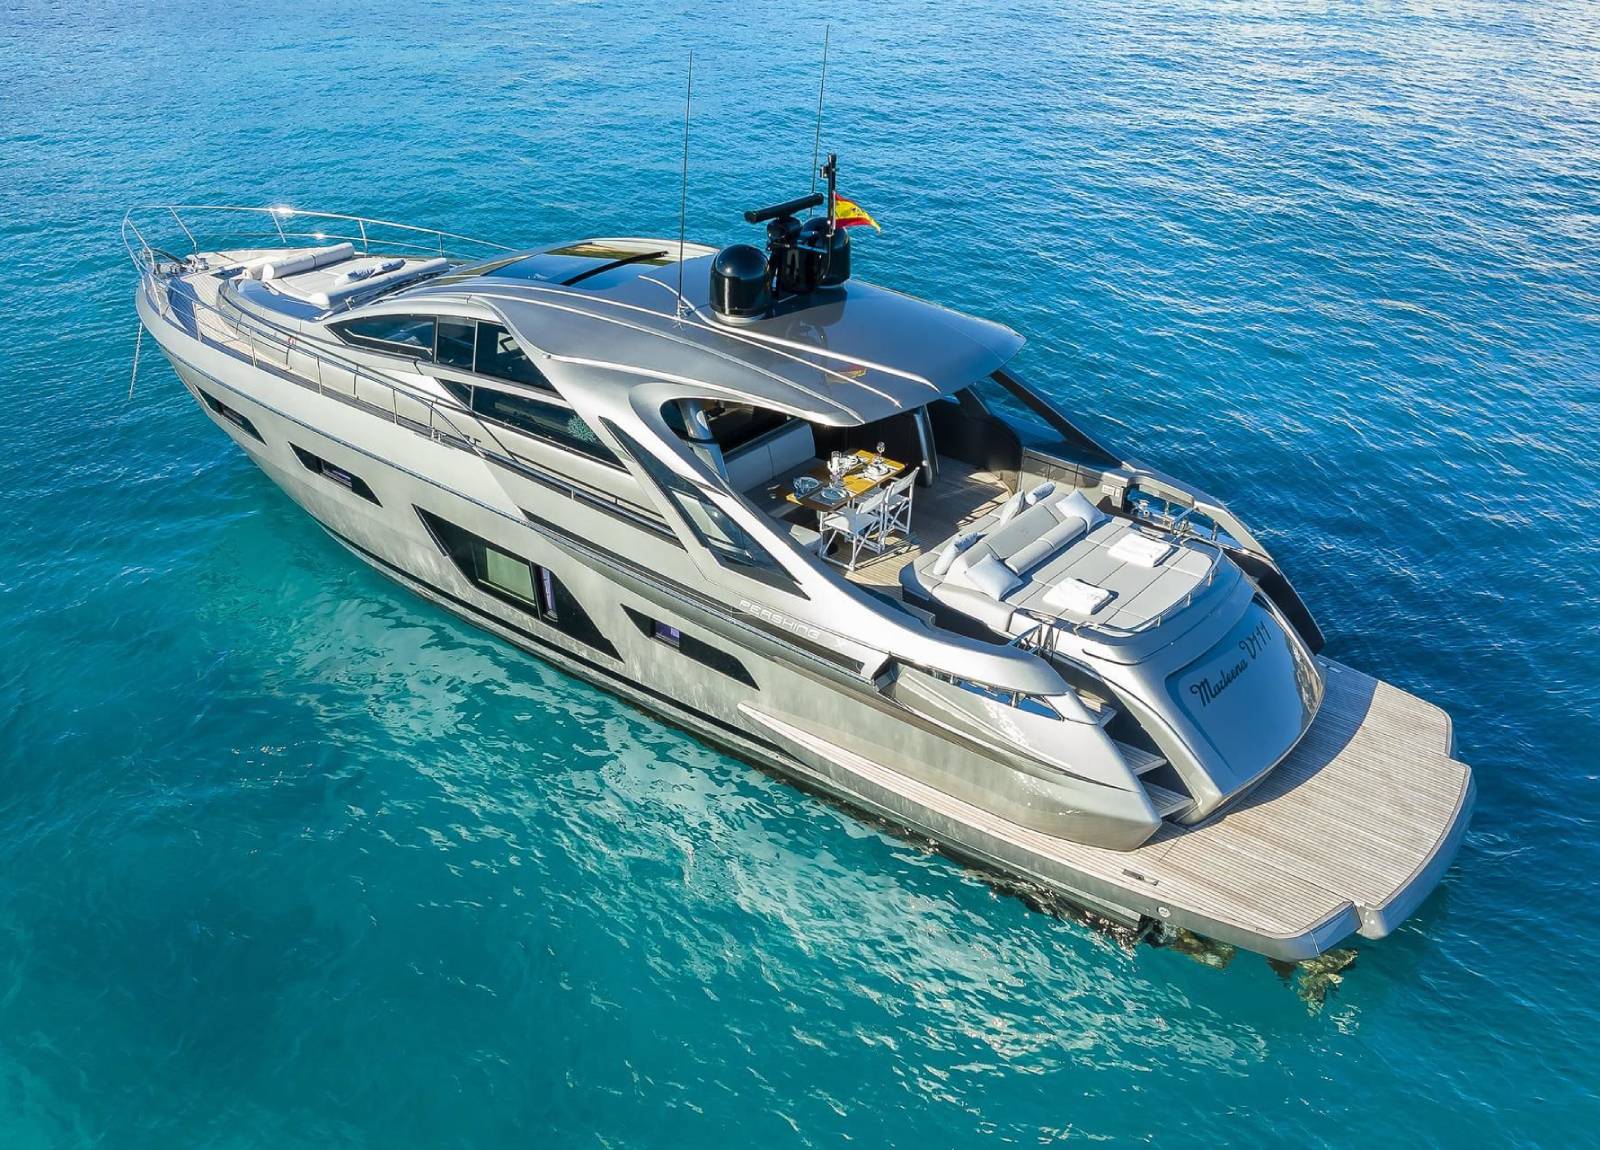 Power boat FOR CHARTER, year 2021 brand Pershing and model 7X, available in Marina Moll Vell Palma Mallorca España